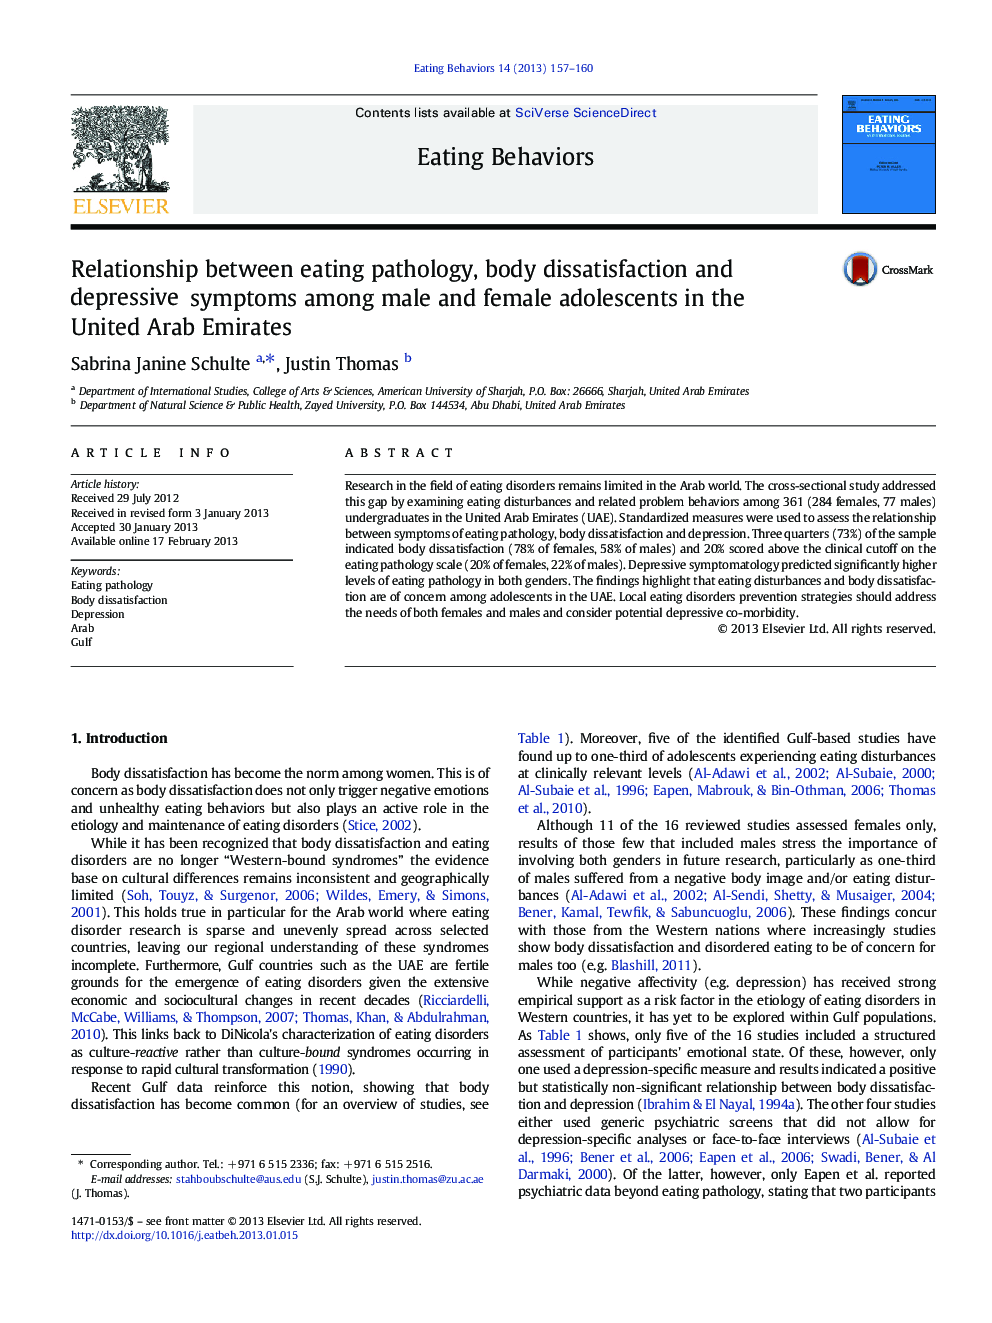 Relationship between eating pathology, body dissatisfaction and depressive symptoms among male and female adolescents in the United Arab Emirates